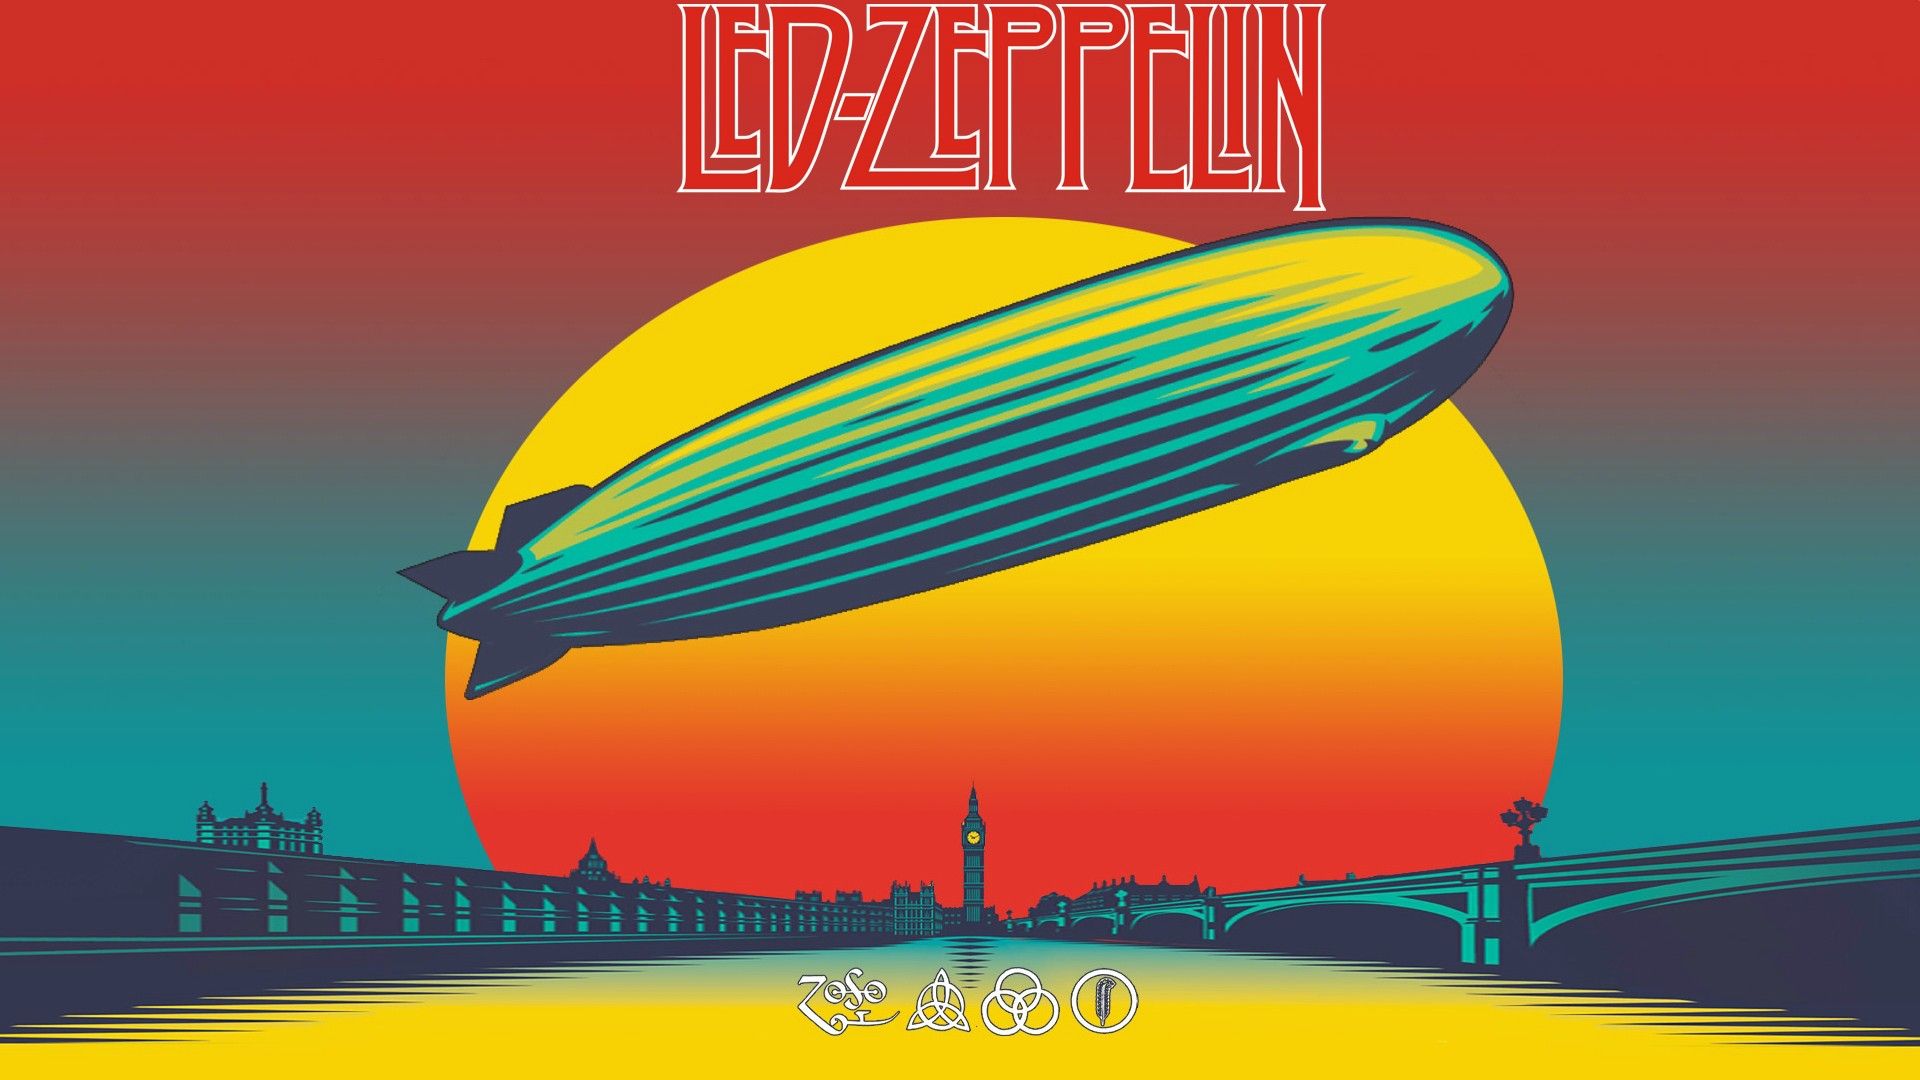 Led Zeppelin album cover. Music picture. HD wallpaper. Led zeppelin wallpaper, Led zeppelin albums, Led zeppelin album covers